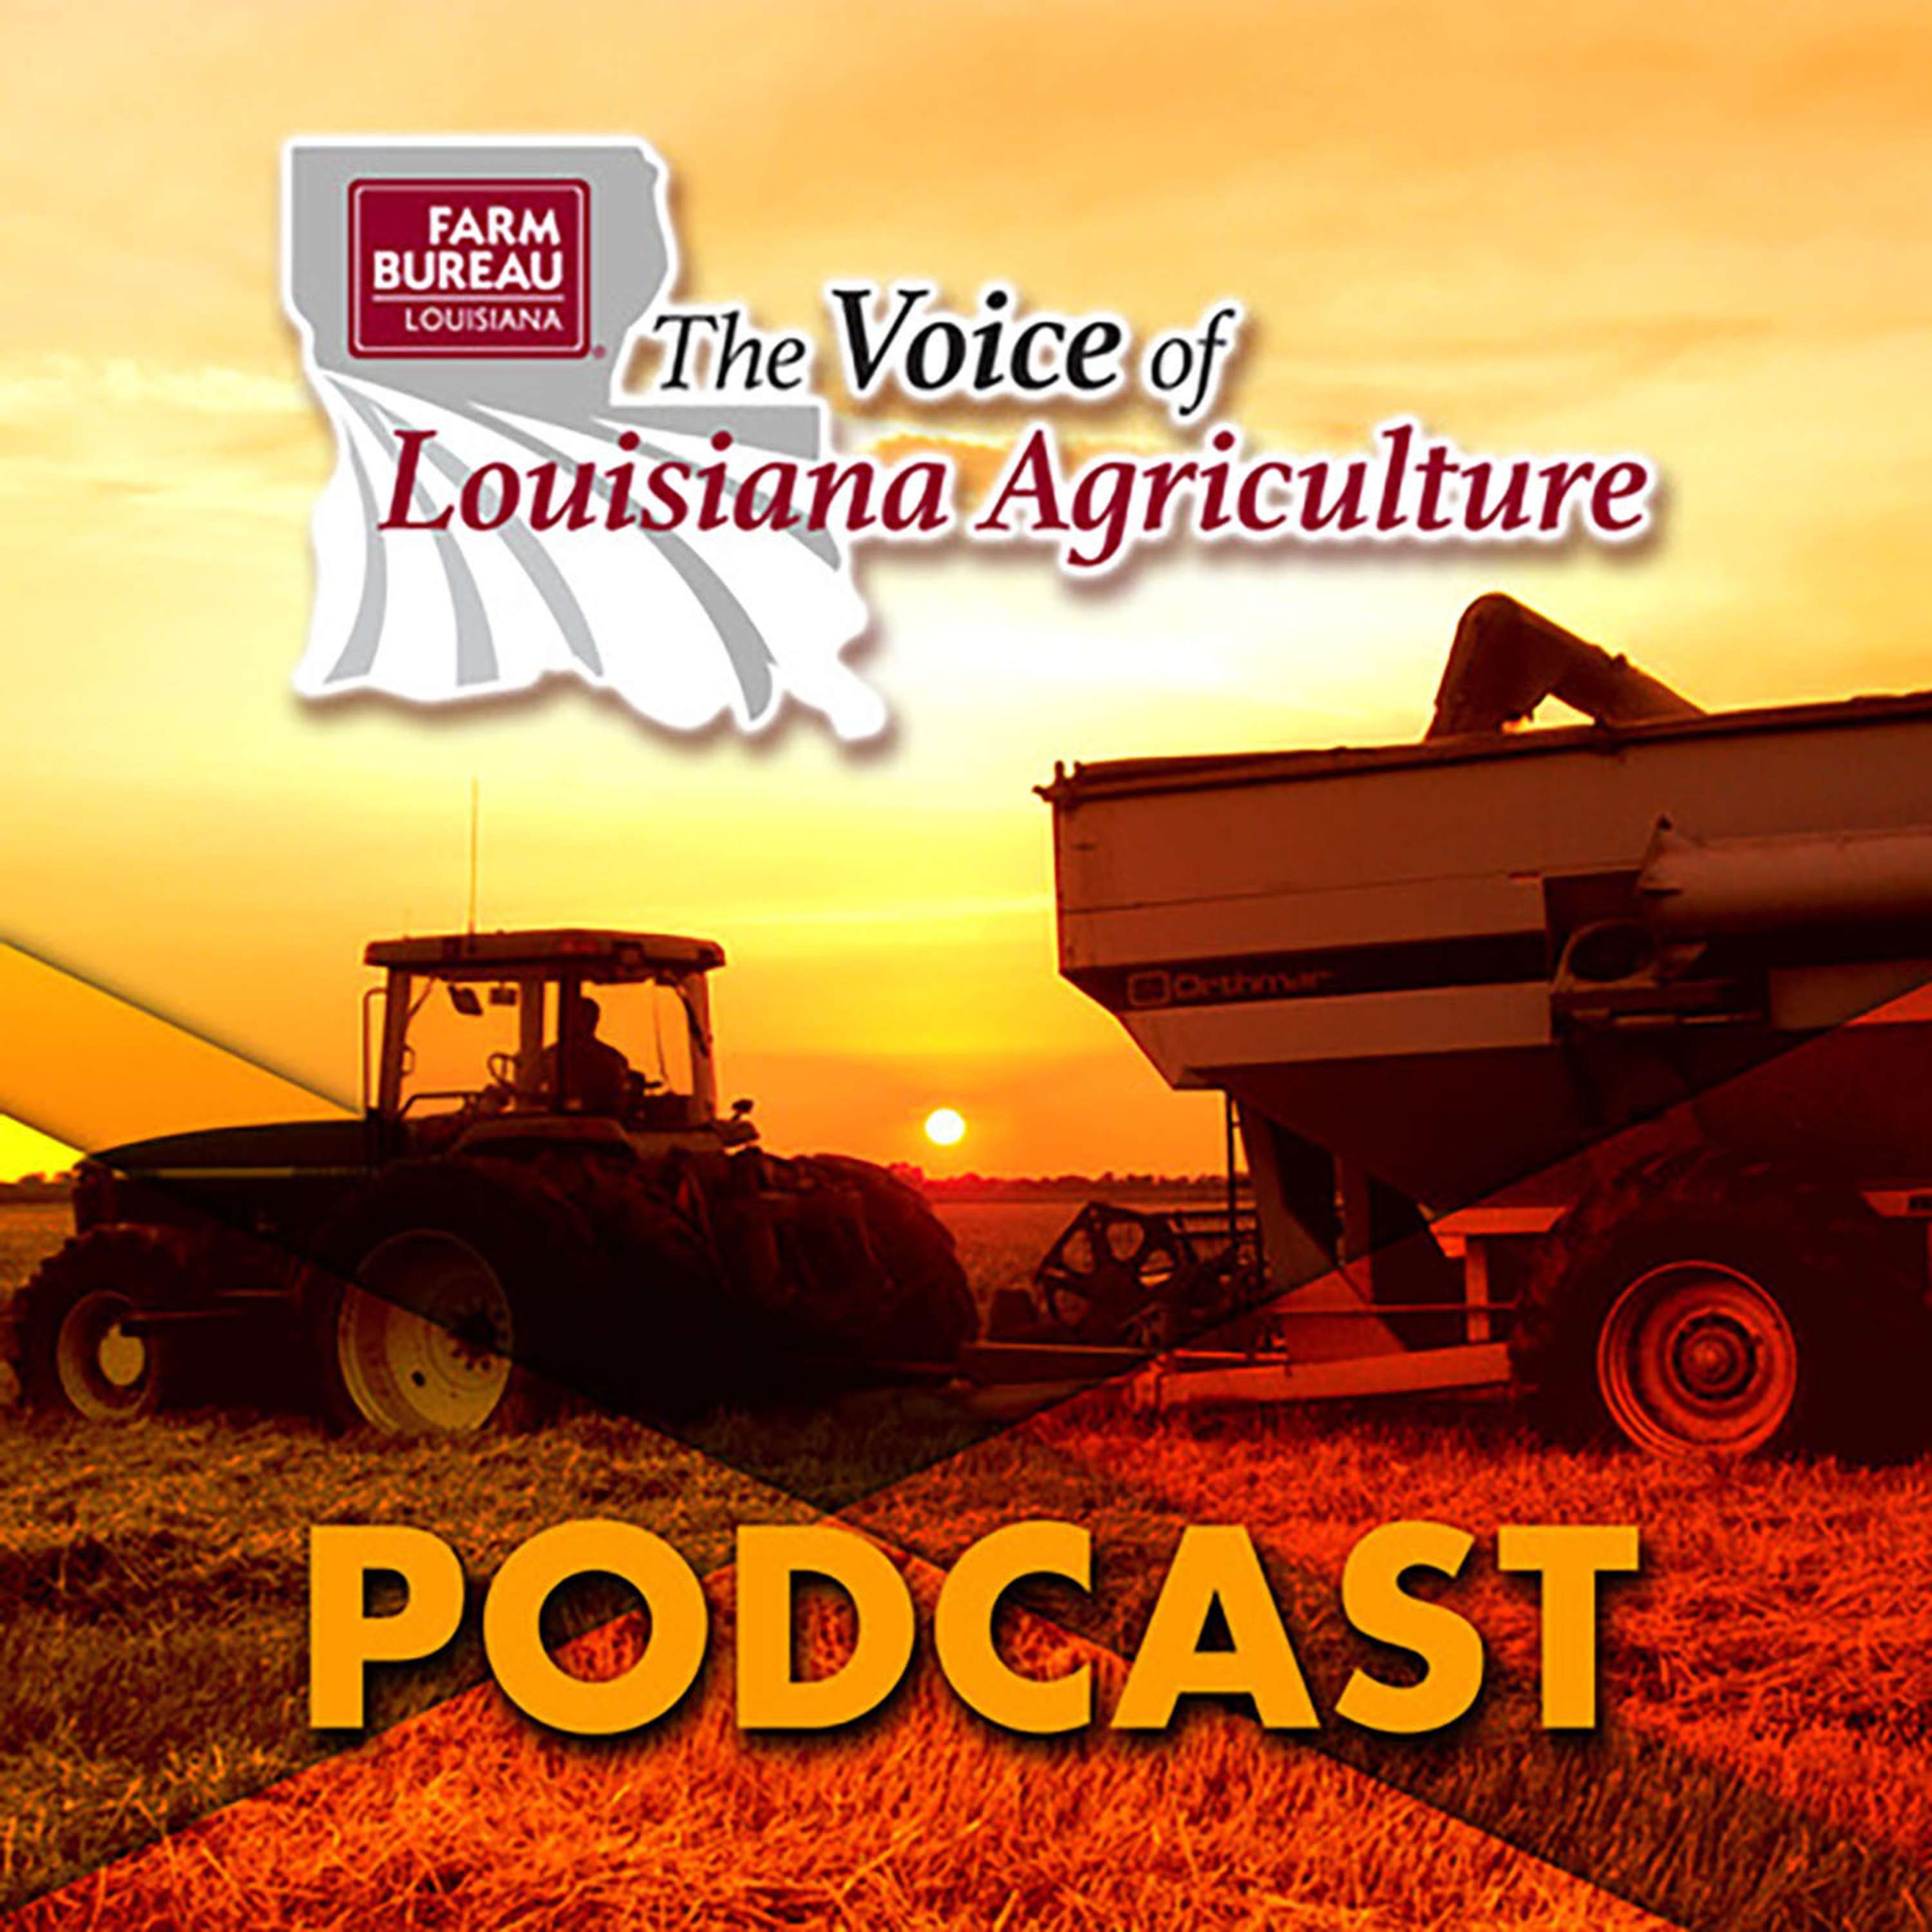 The Voice of Louisiana Agriculture Podcast #17 - September 7, 2018